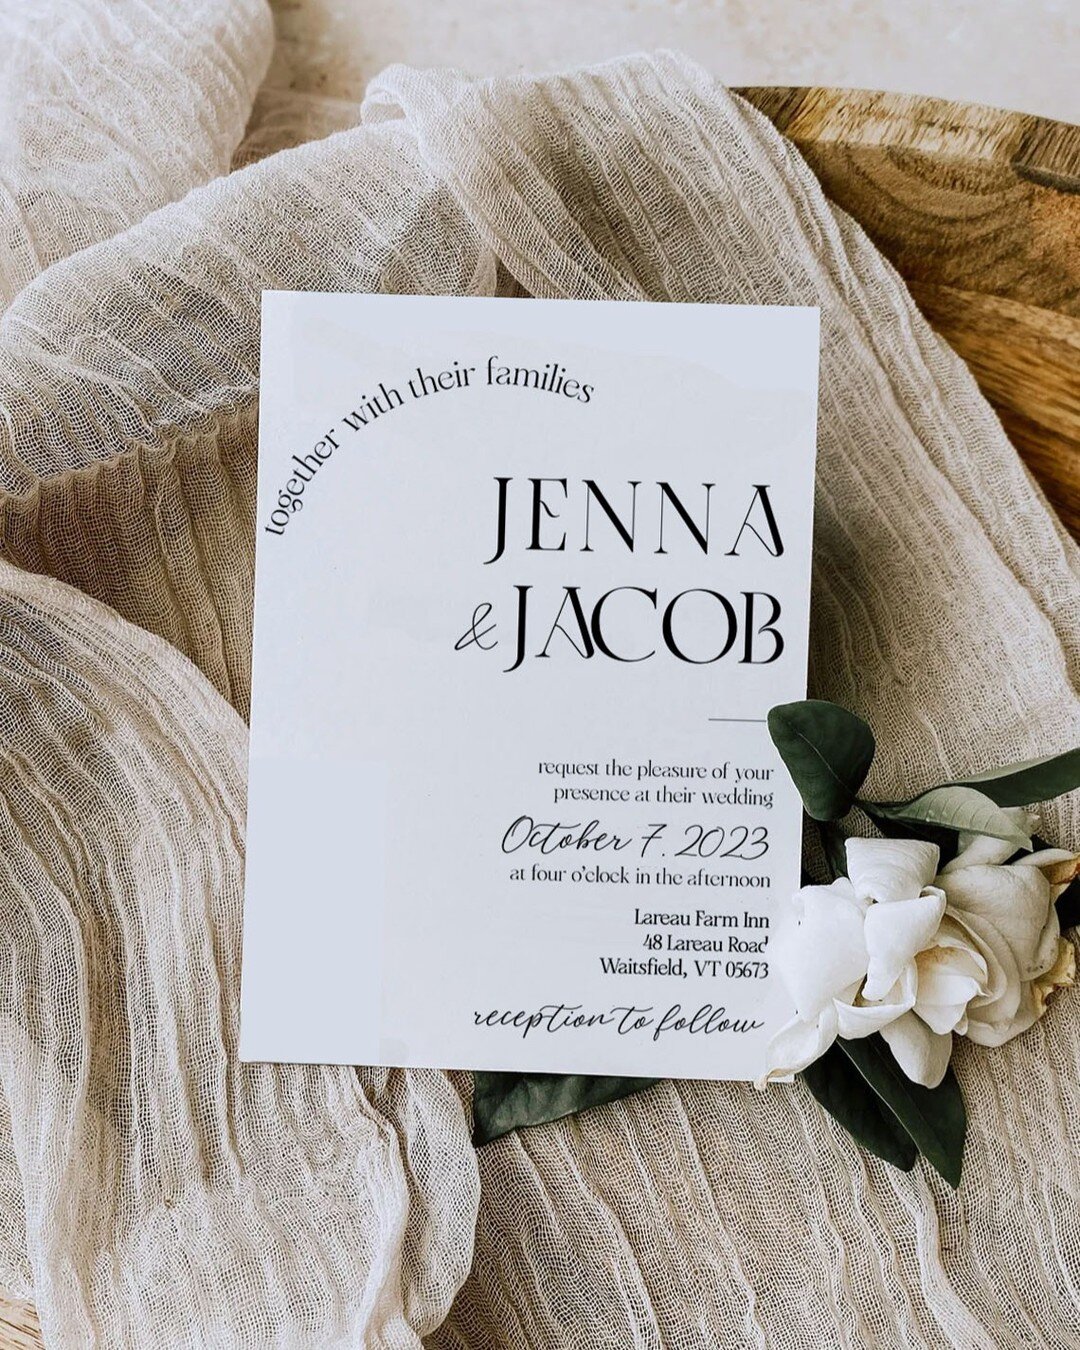 ✨ Support a small business! Follow me! ✨

Weddings are such a happy and beautiful time in people&rsquo;s lives and being a part of the design process is so much fun. Knowing that my invitations or save-the-date cards are one of the first indications 